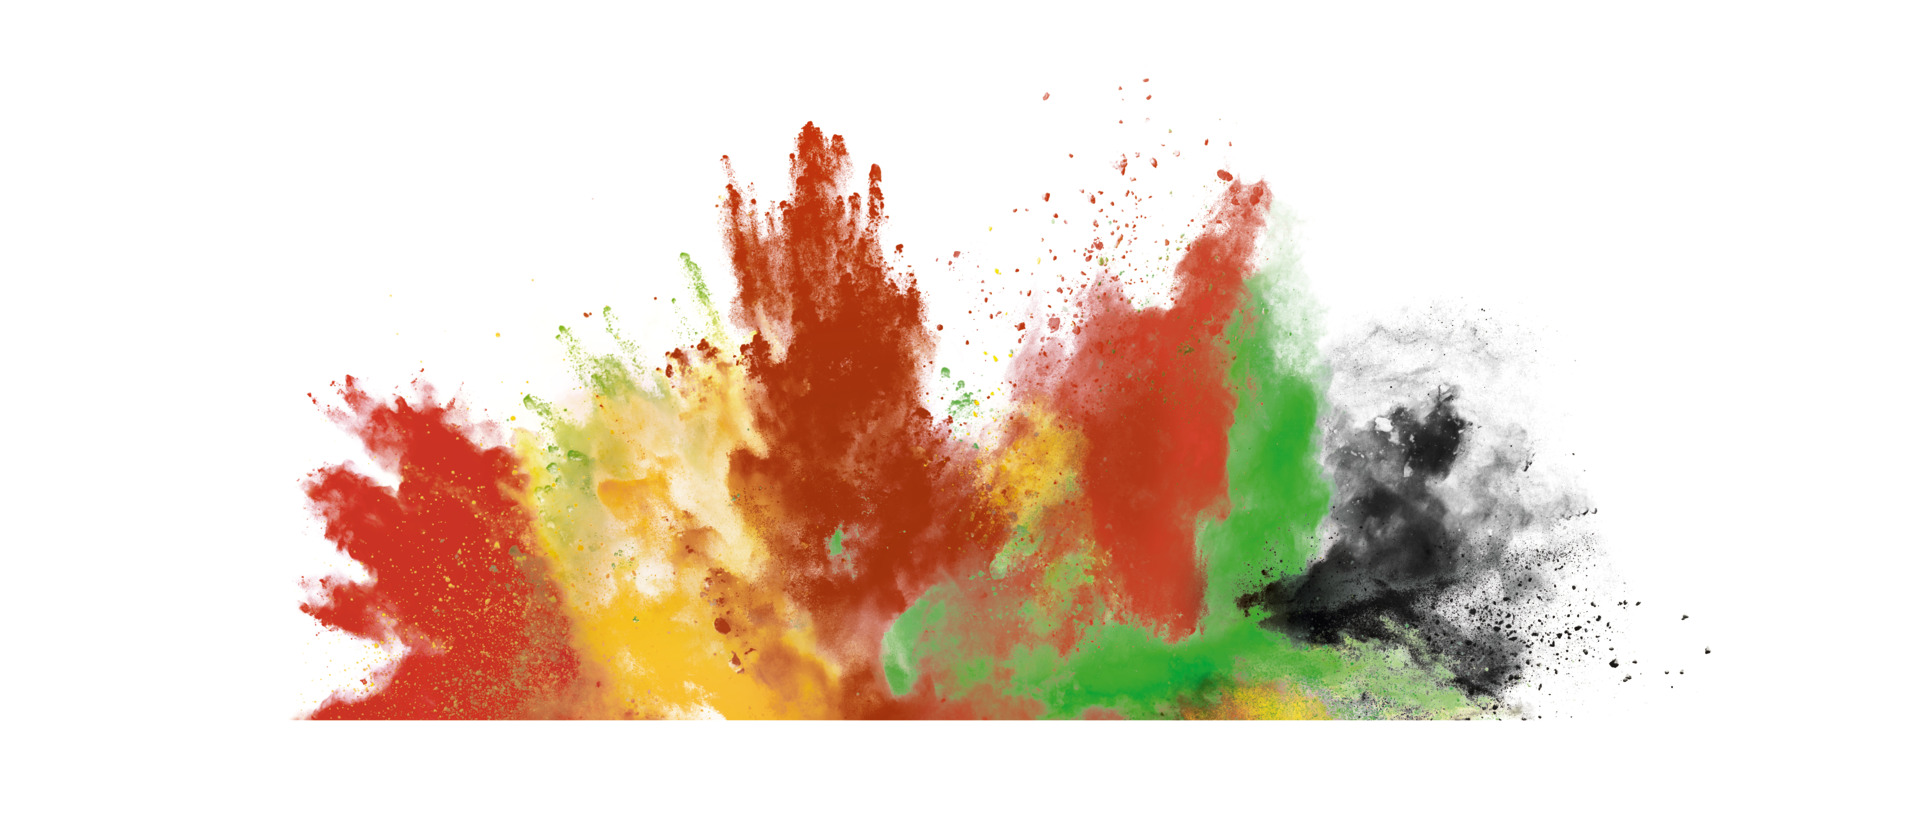 Pigment explosion against white background